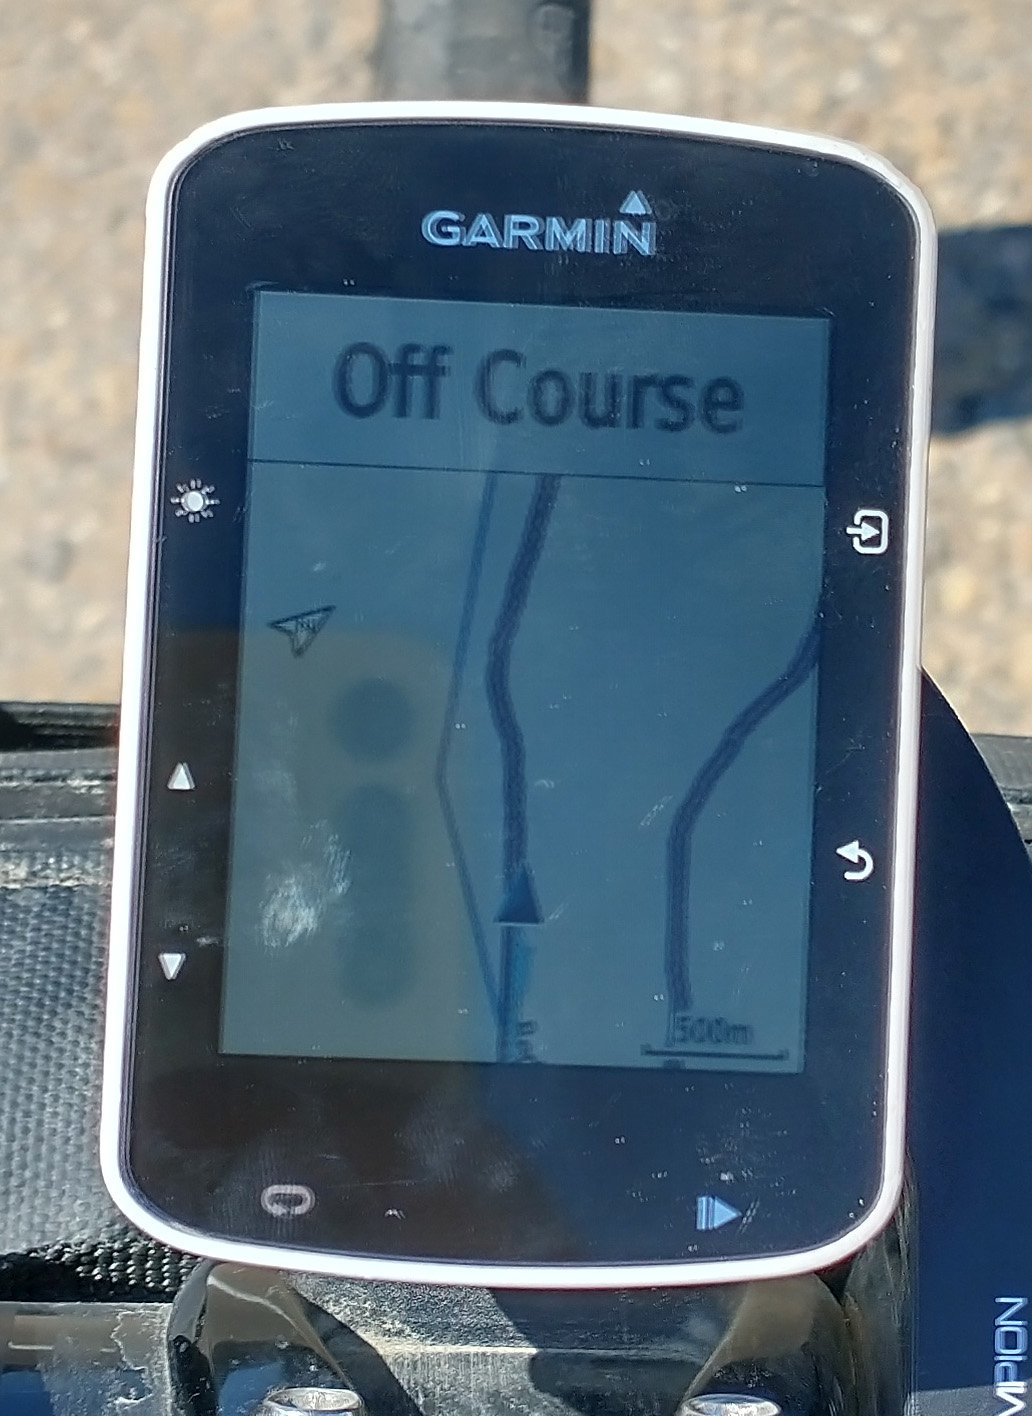 Garmin says "Off Course" instead of "Wrong Direction" if you choose to go clockwise instead of counterclockwise. It will say this the entire time. Good work.